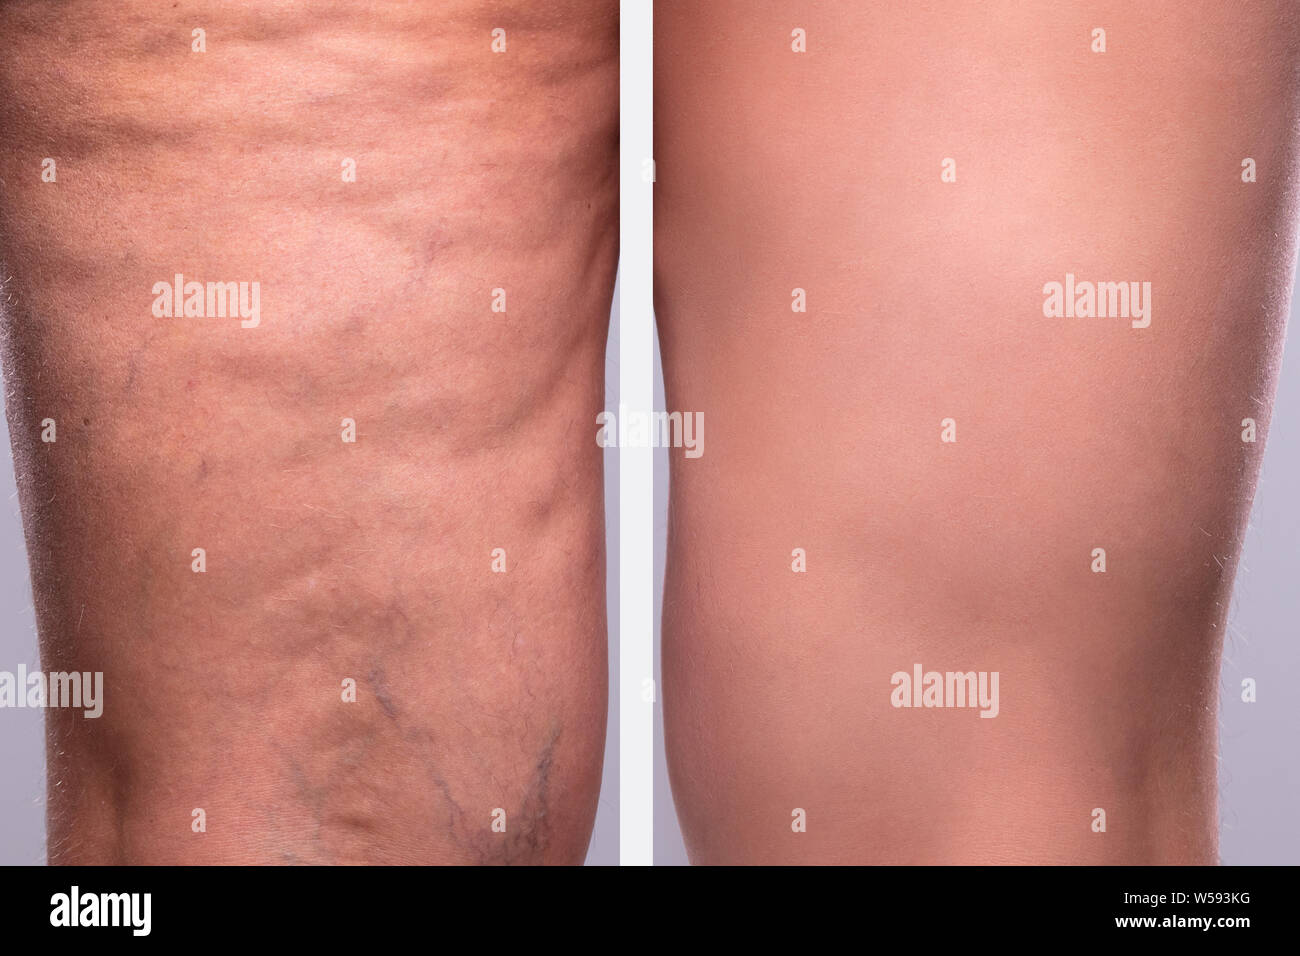 Comparison Of A Person's Legs Thighs With And Without Cellulite Stock Photo